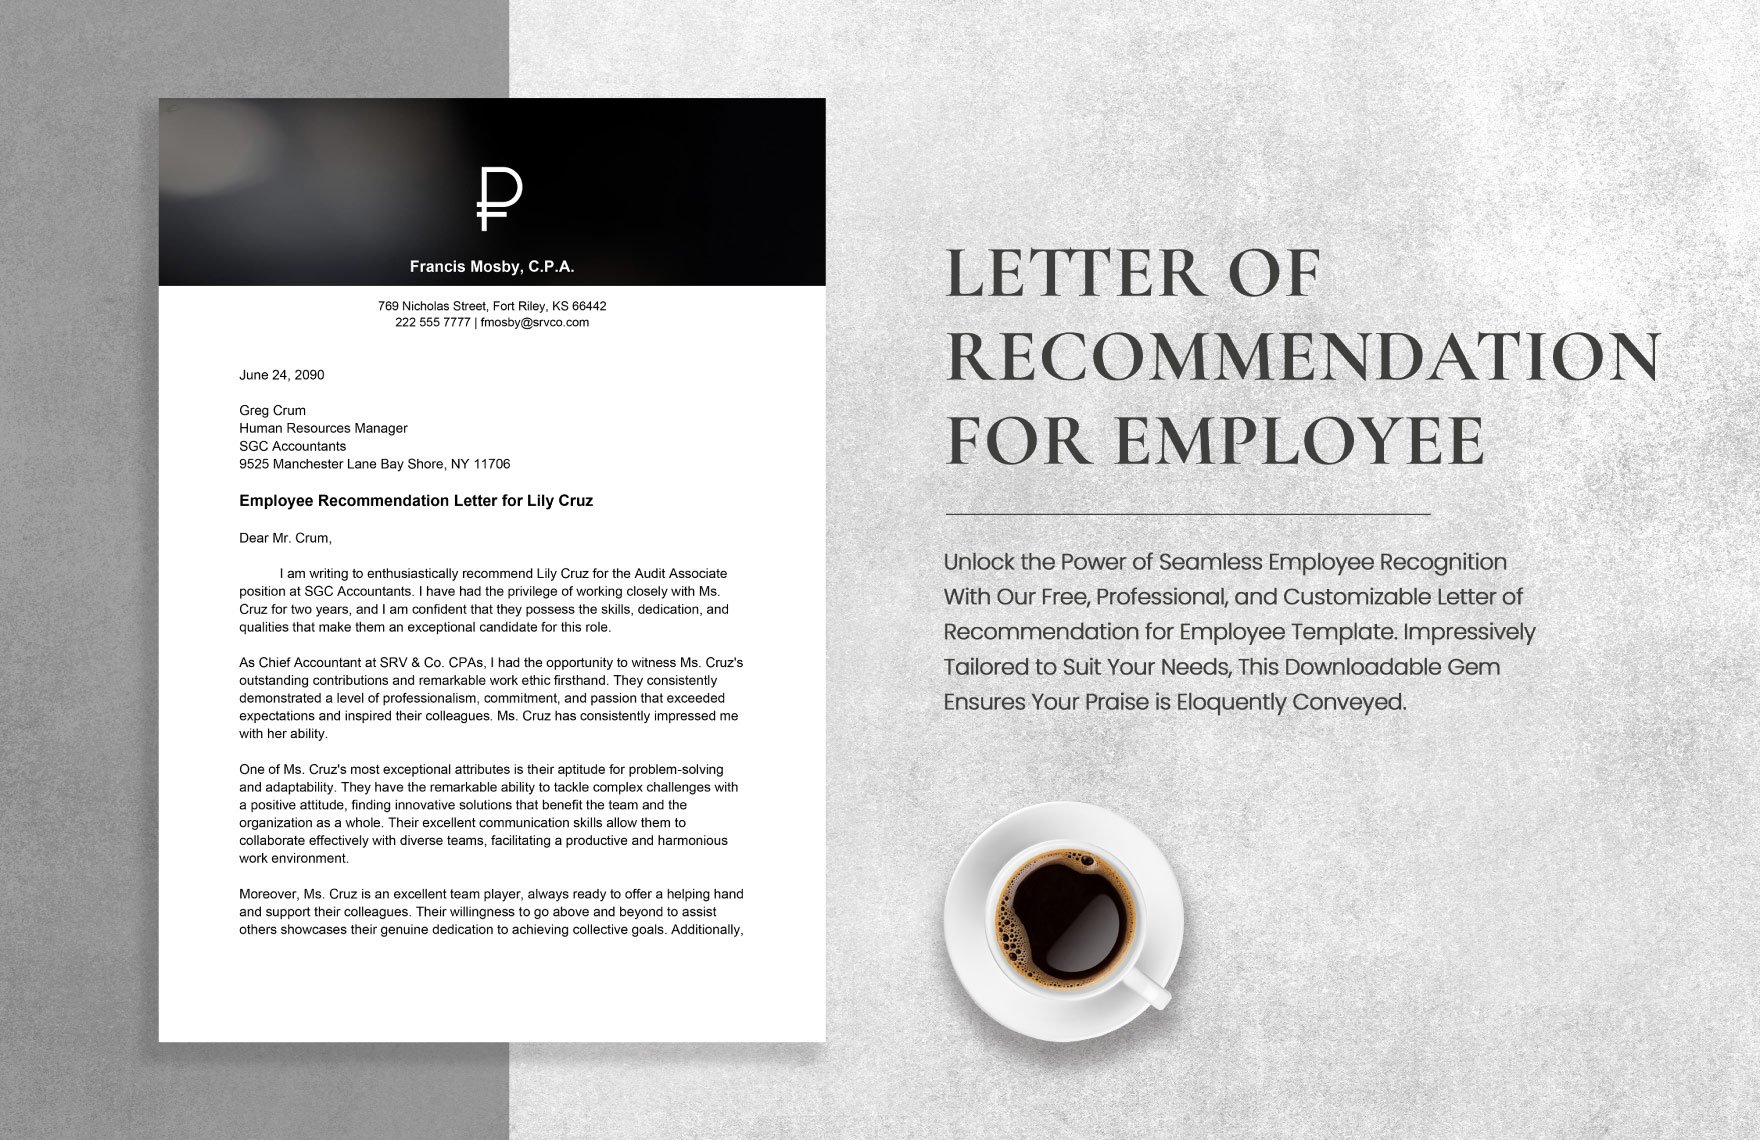 Letter of Recommendation for Employee